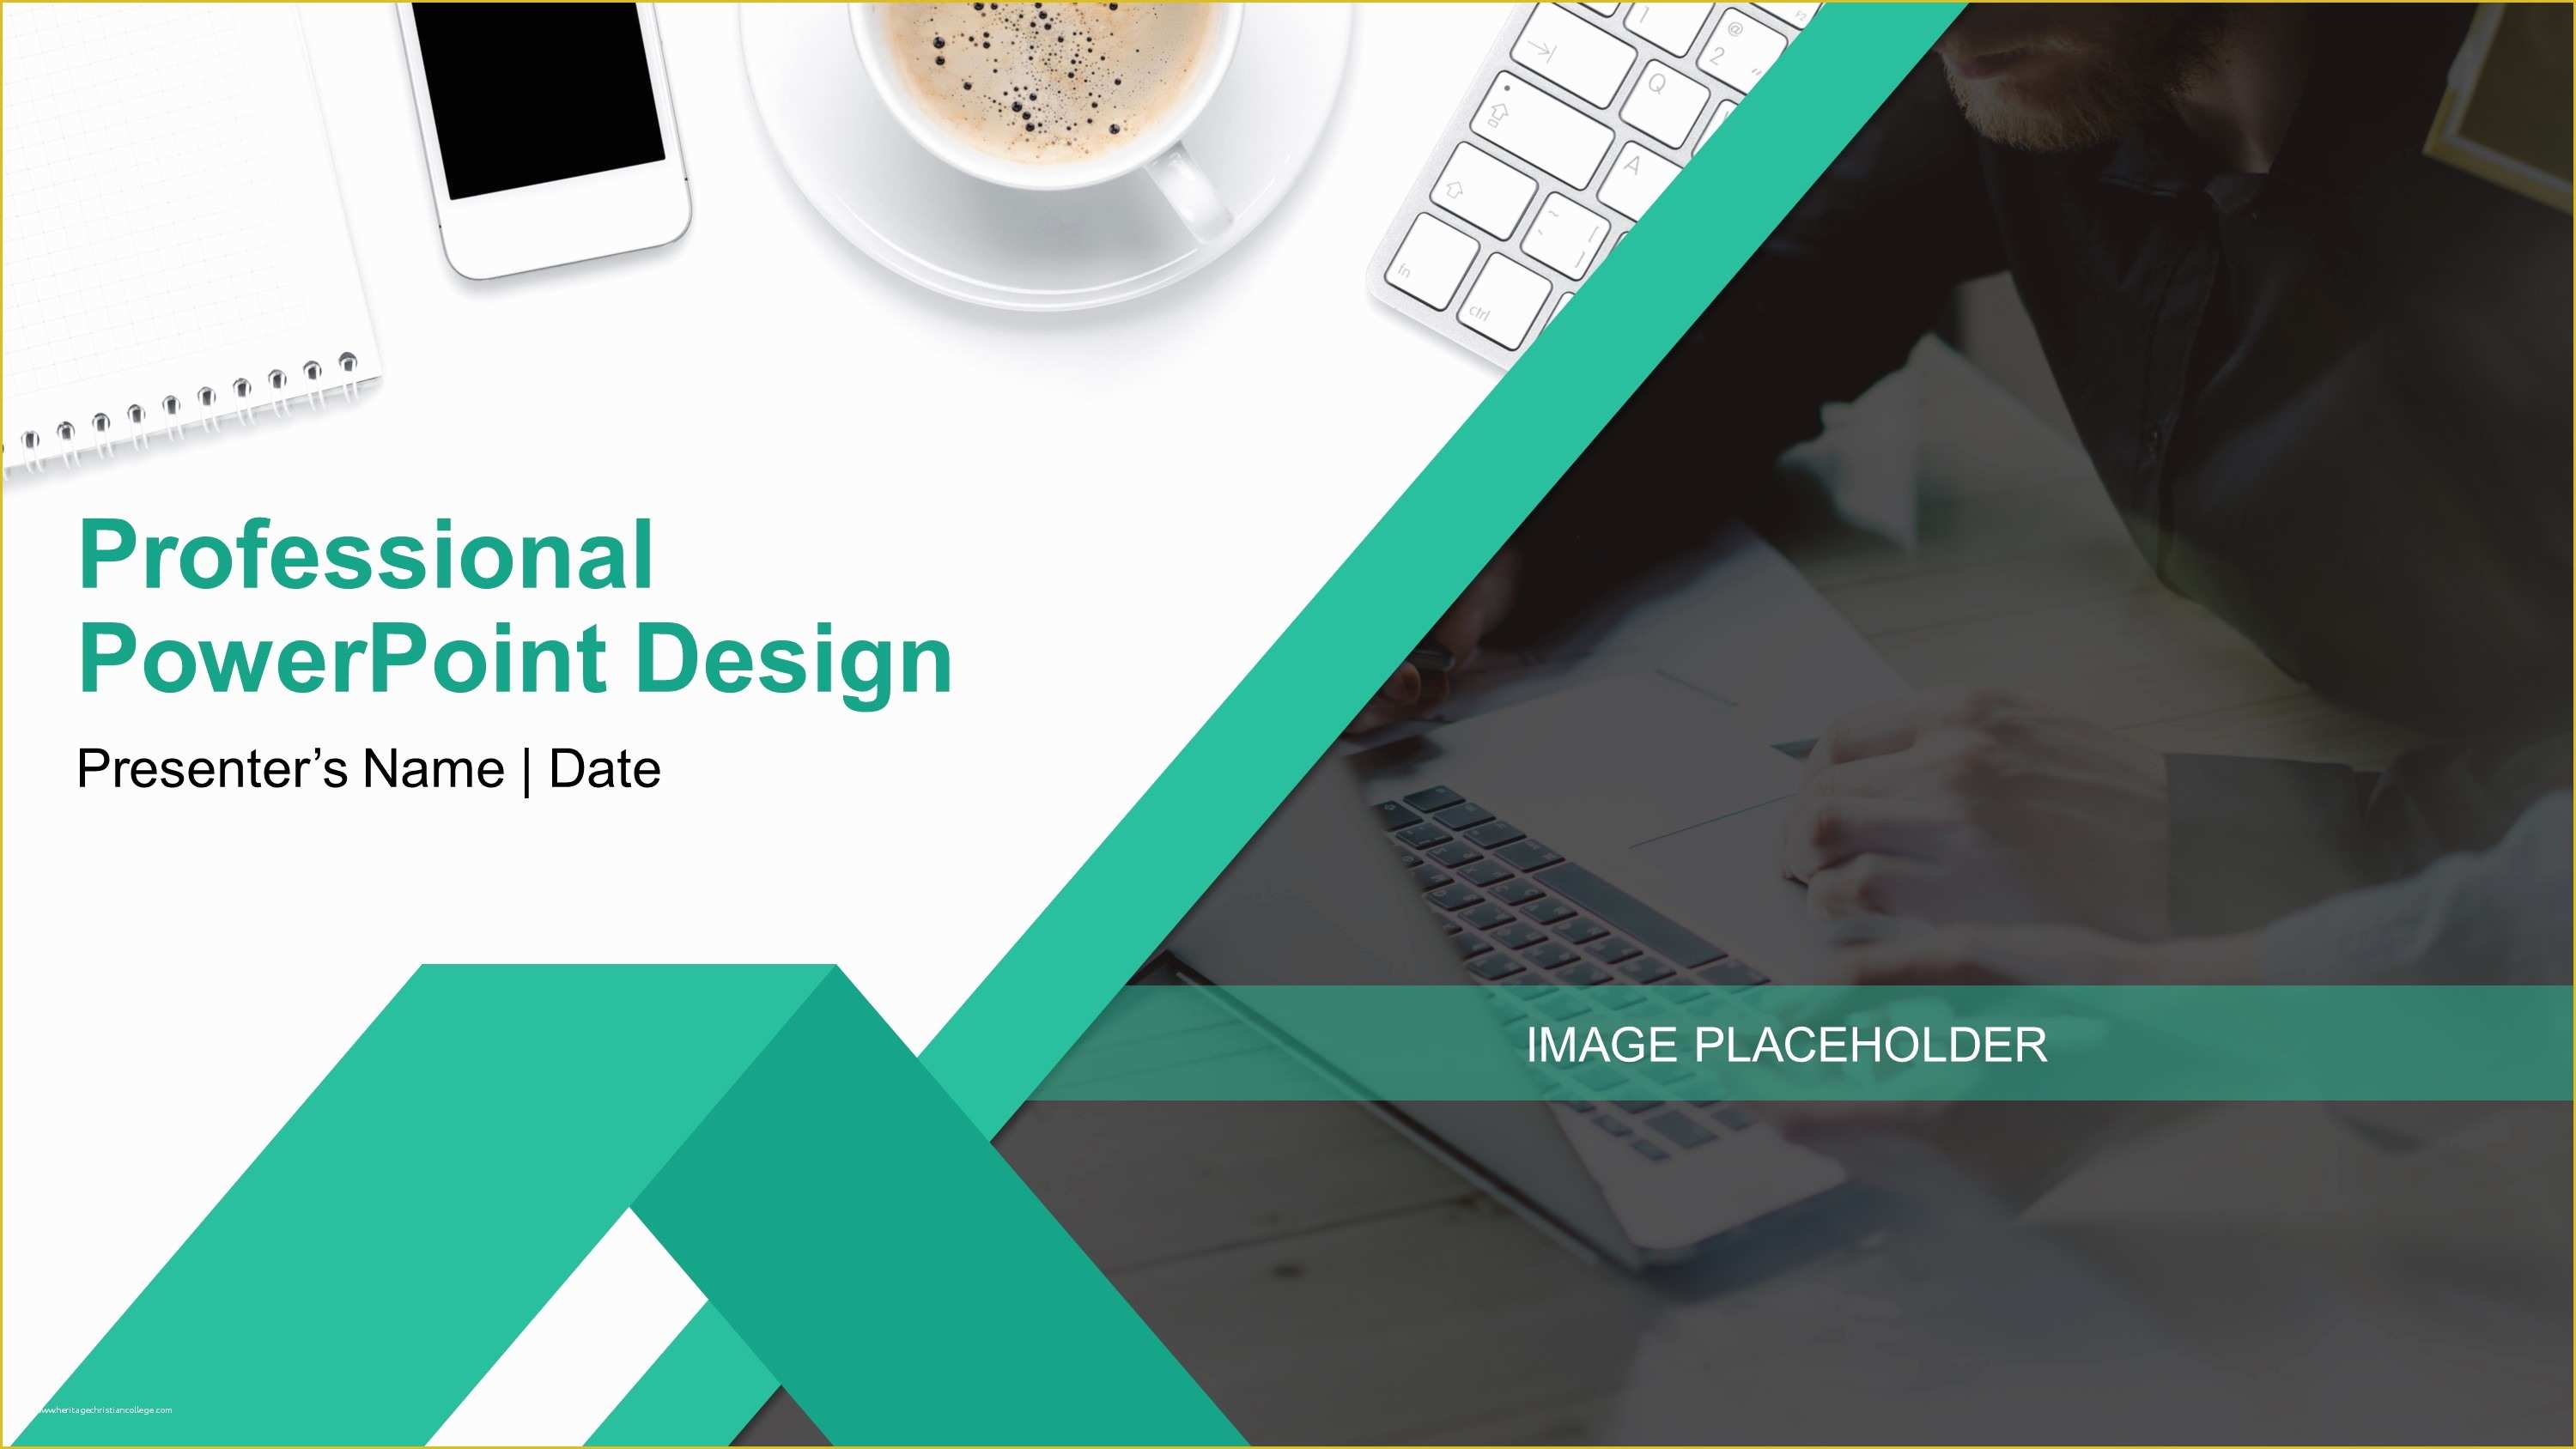 Ppt Templates for Technical Presentation Free Download Of Unlimited Free Powerpoint Templates and Slides